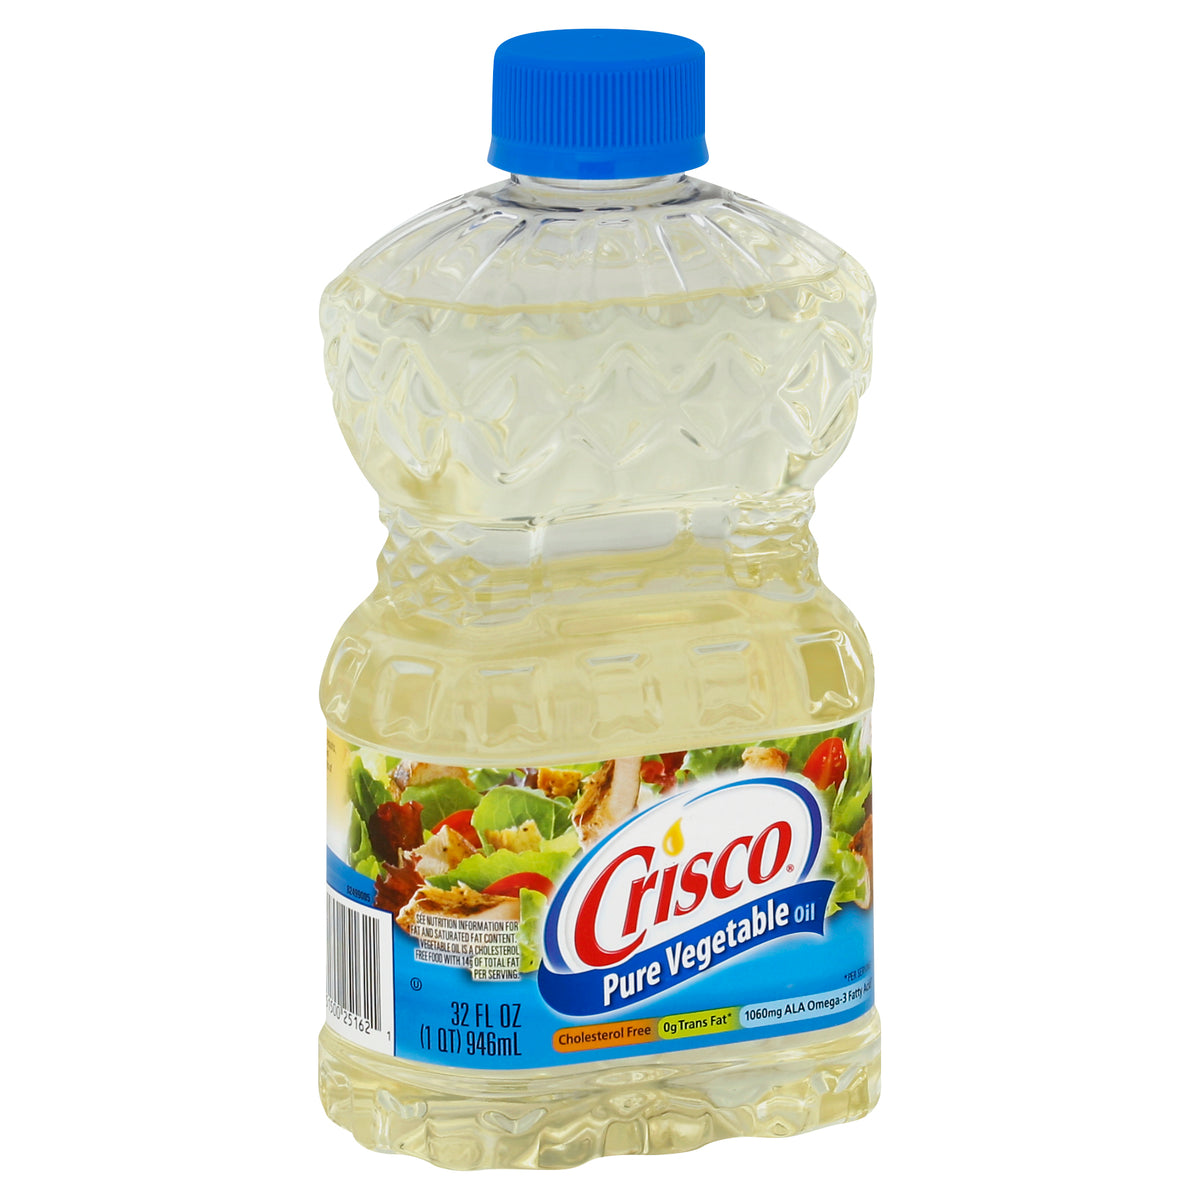 Save on Crisco Pure Vegetable Oil Order Online Delivery